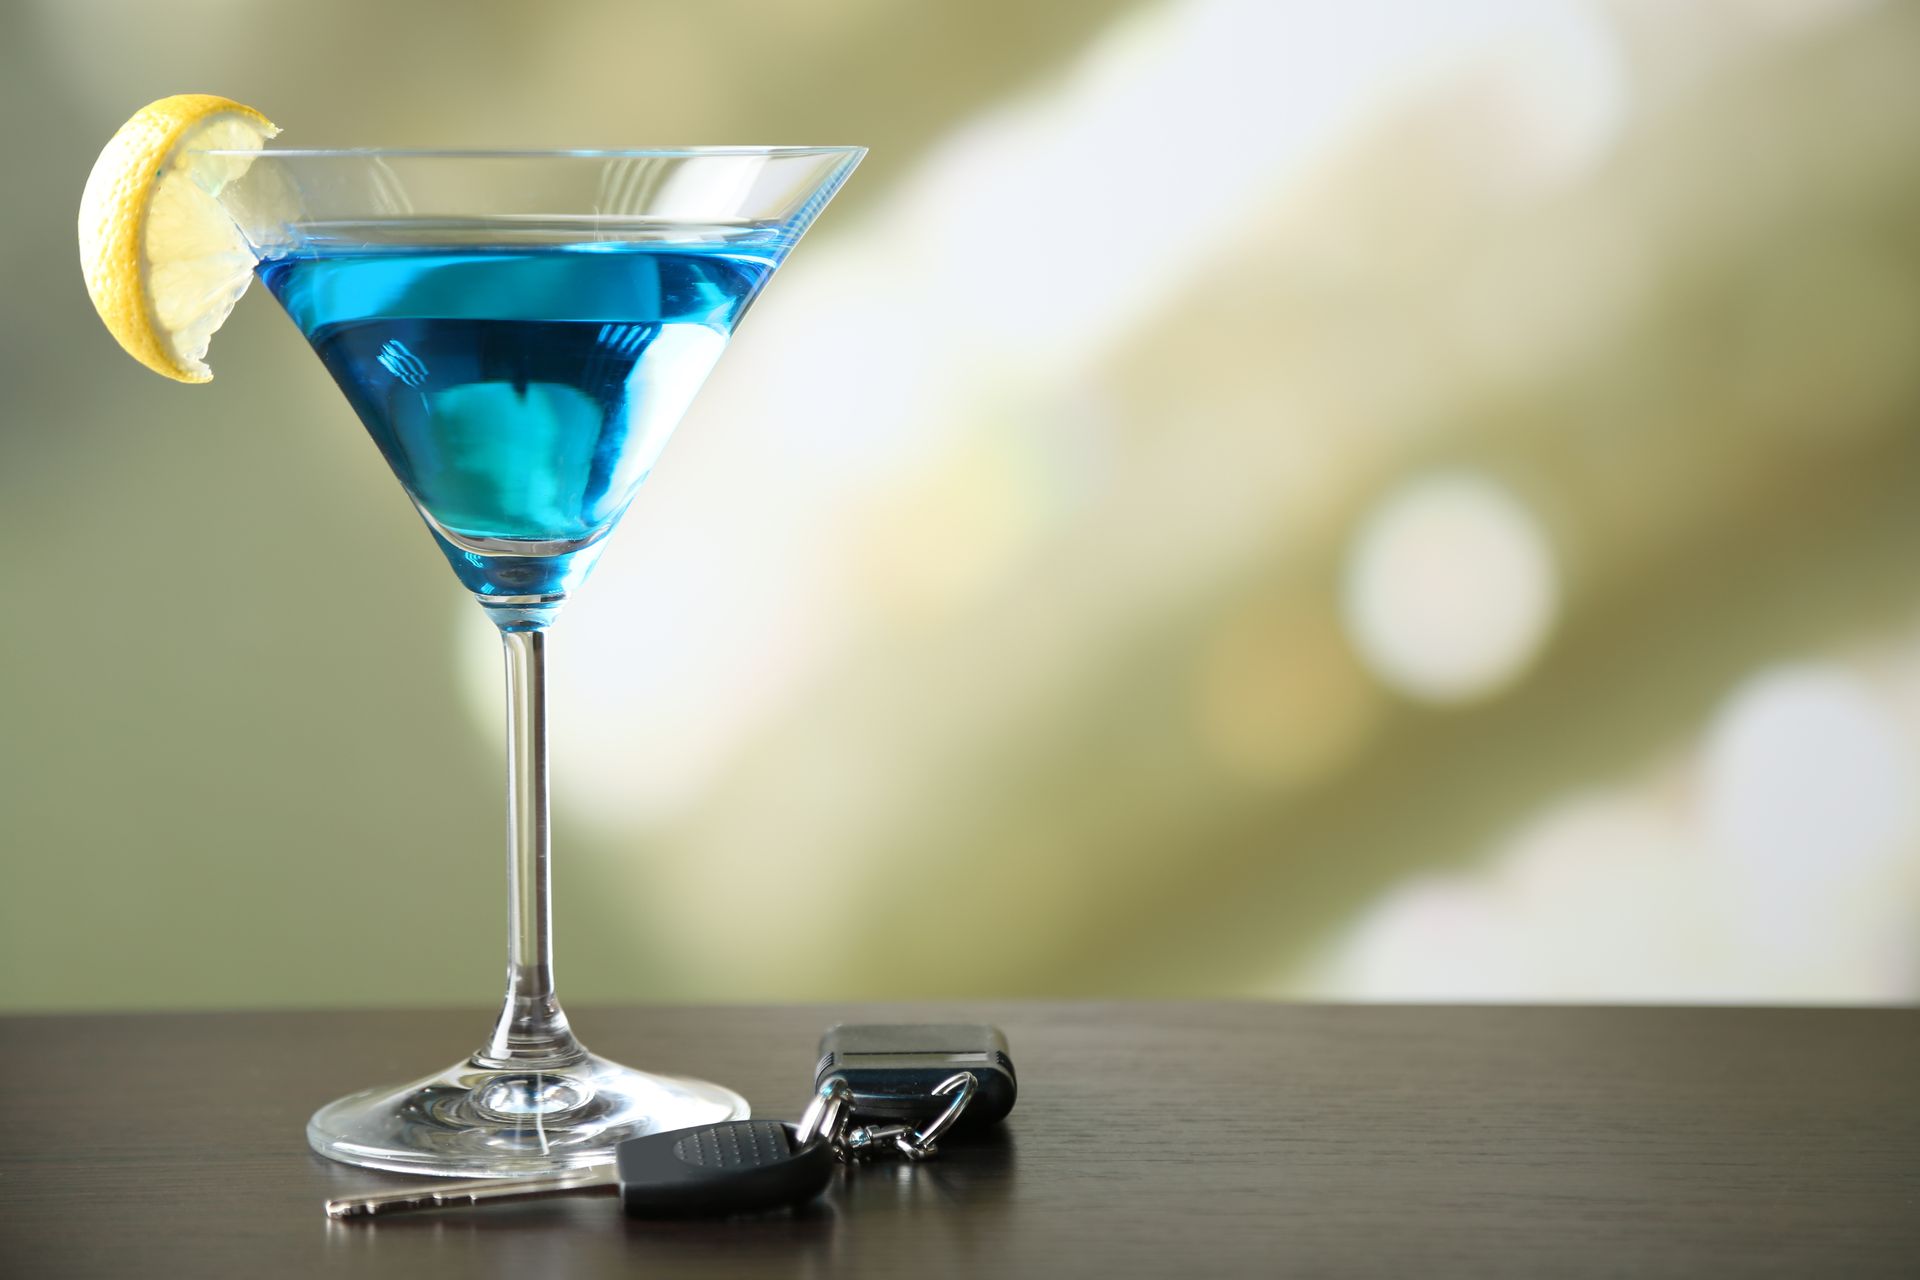 An Image of a car next to a blue martini with a lemon